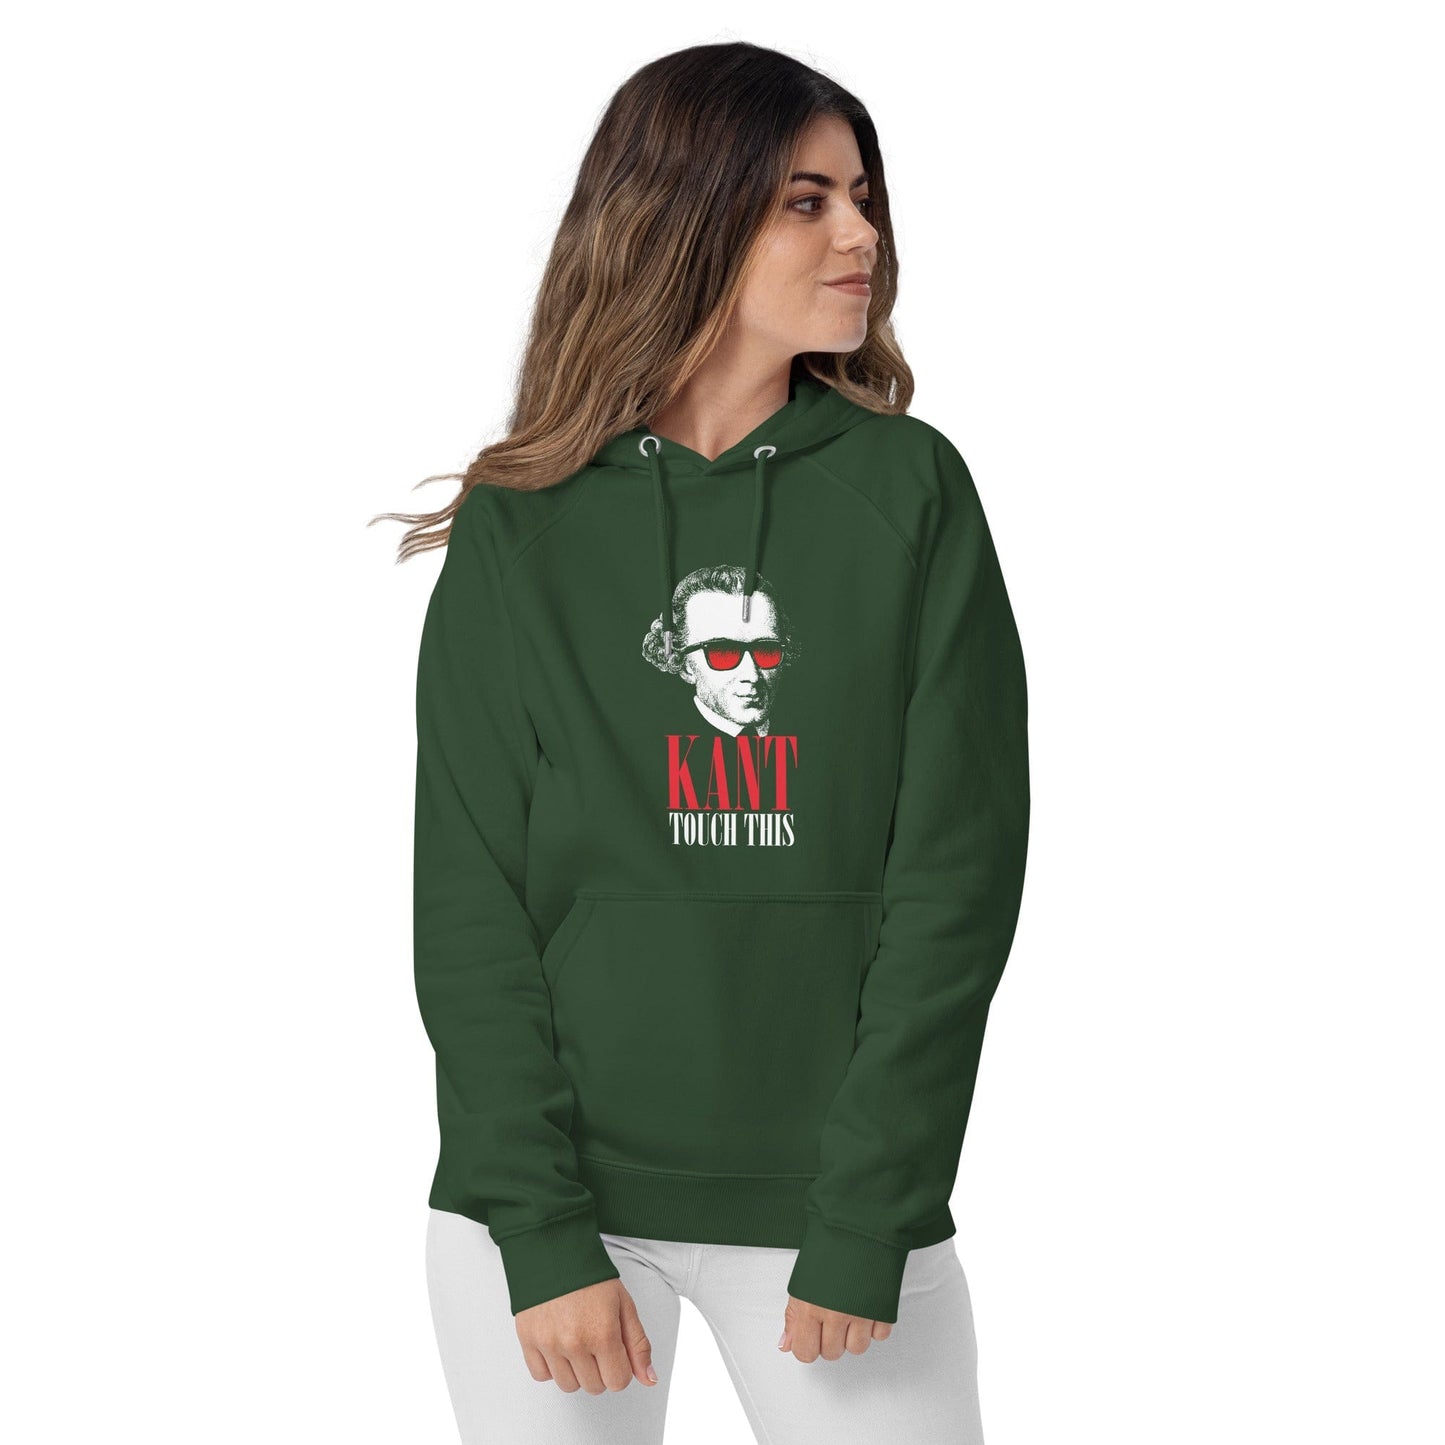 Kant touch this - Eco Hoodie